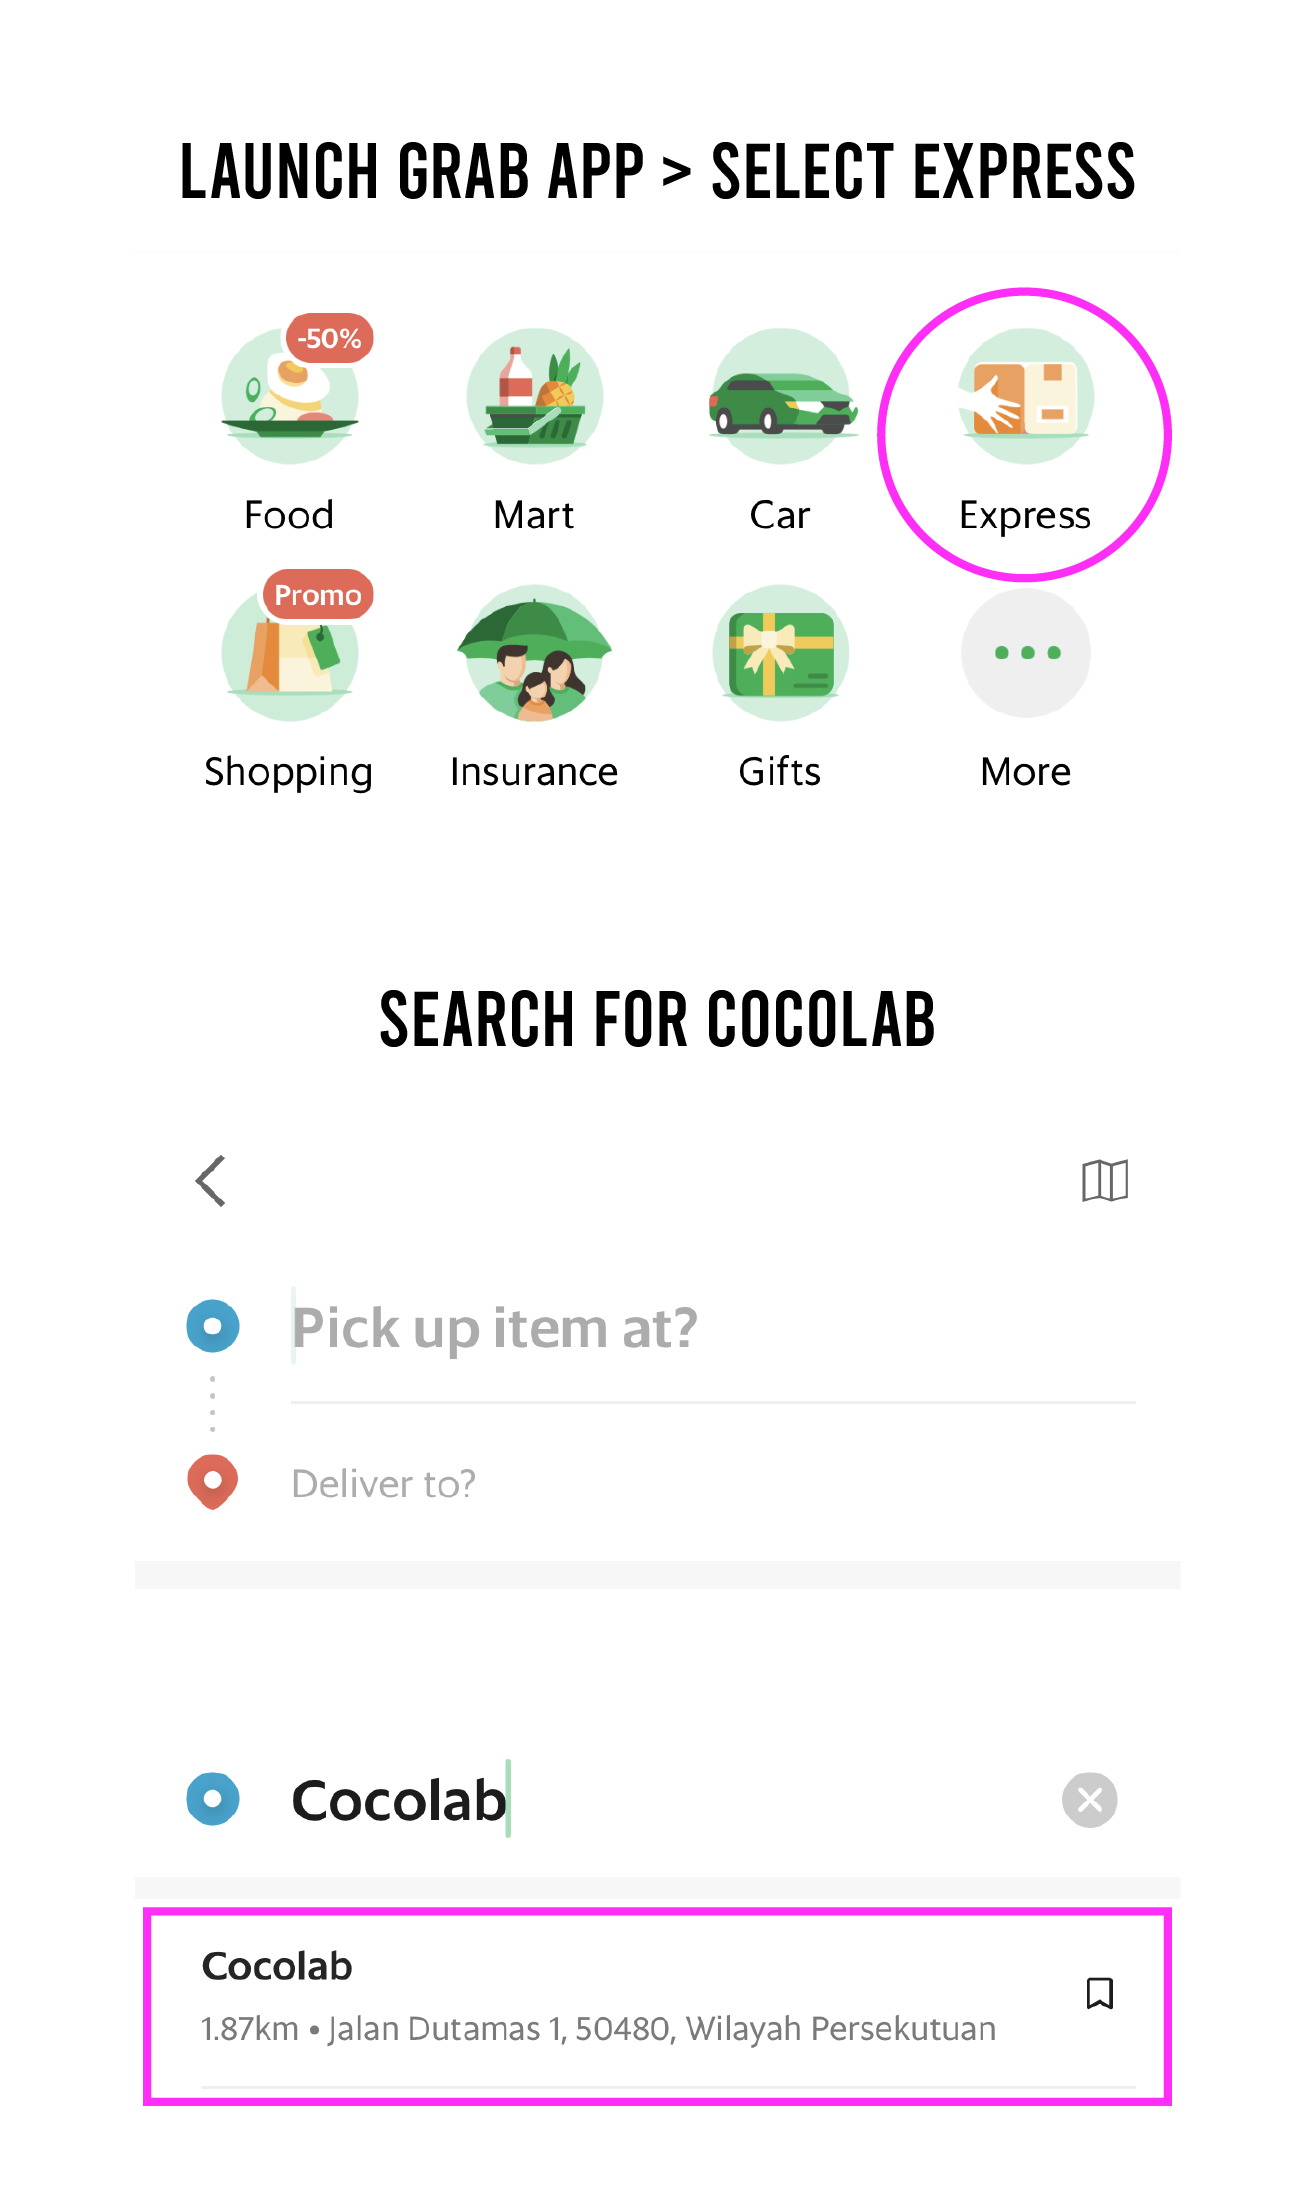 How to use grab for self pickup at COCOLAB.1